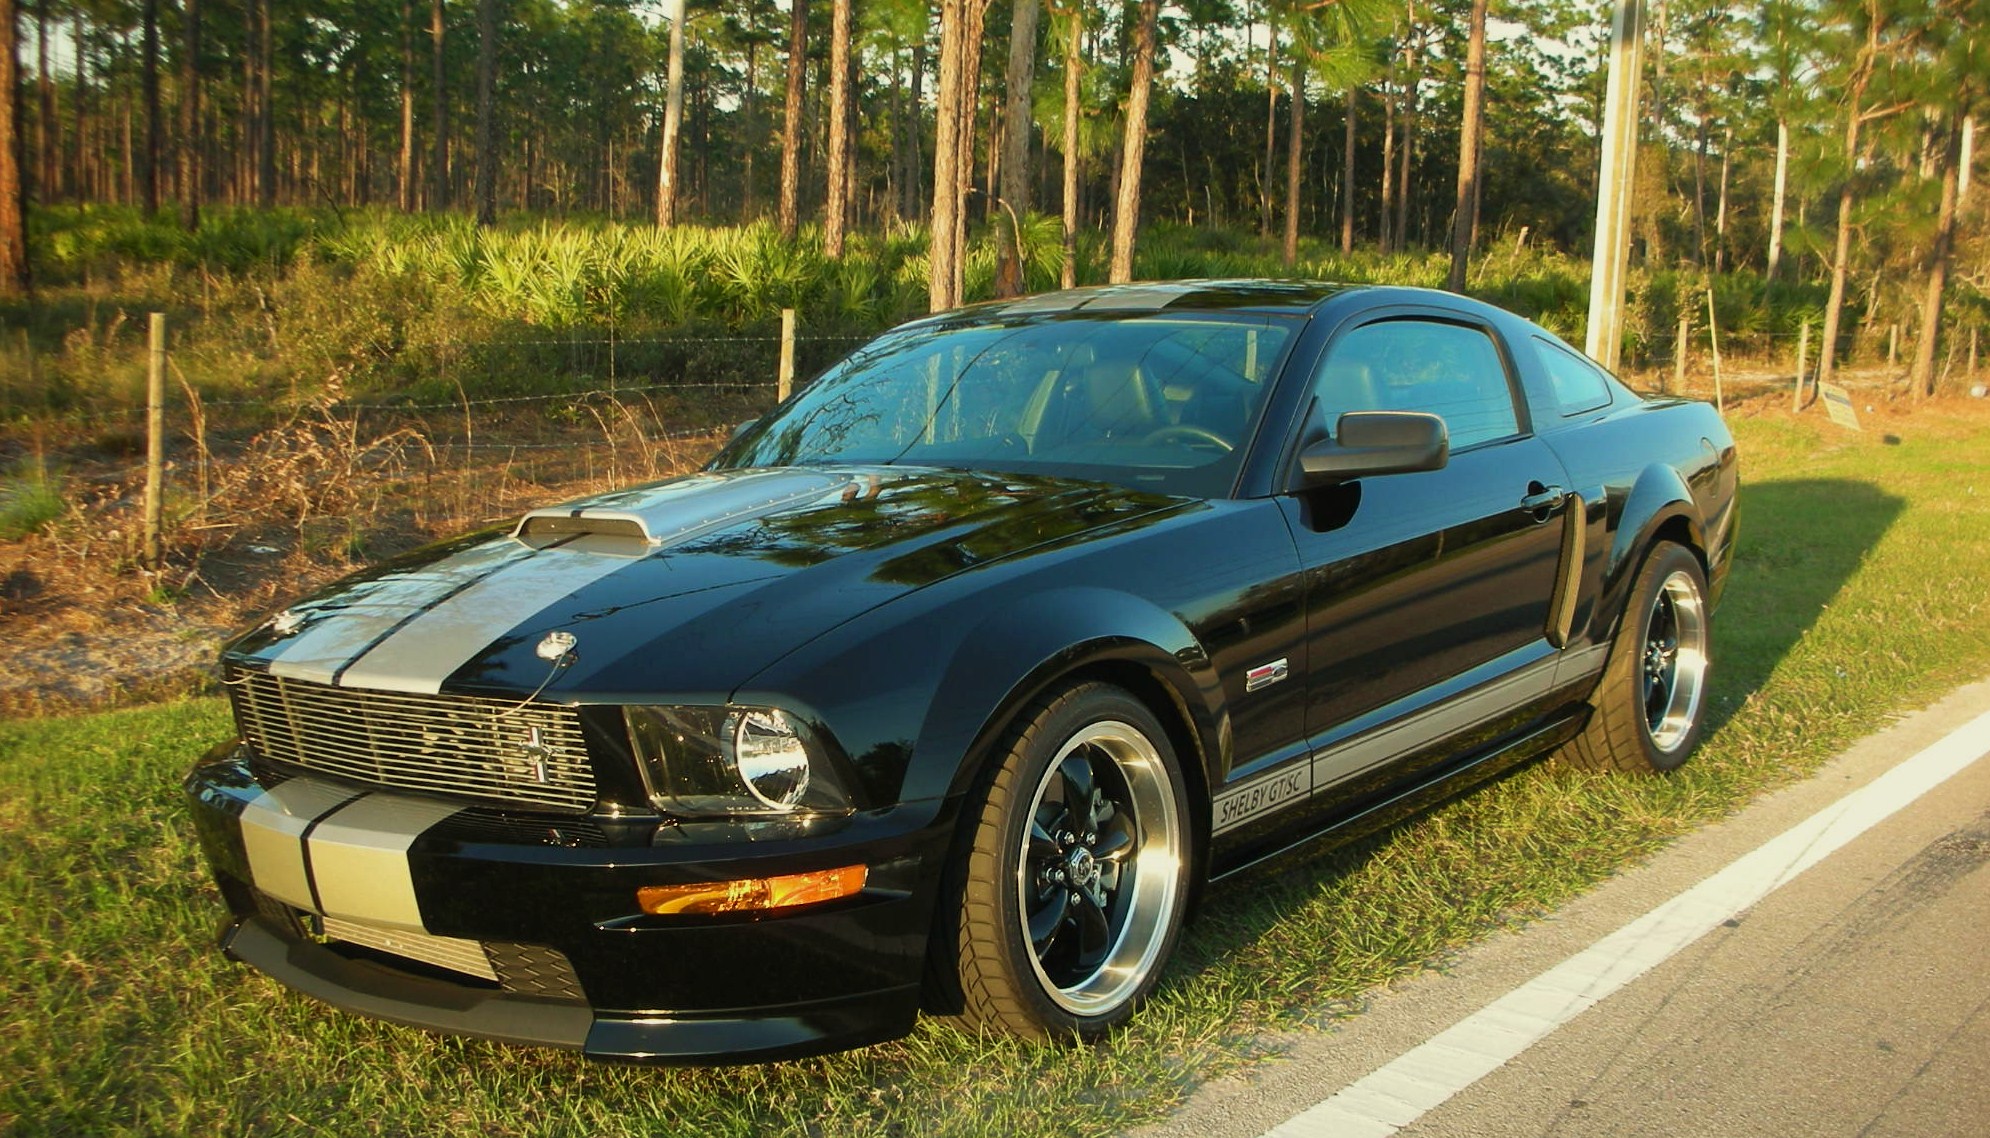  2007 Ford Mustang Shelby GT SC